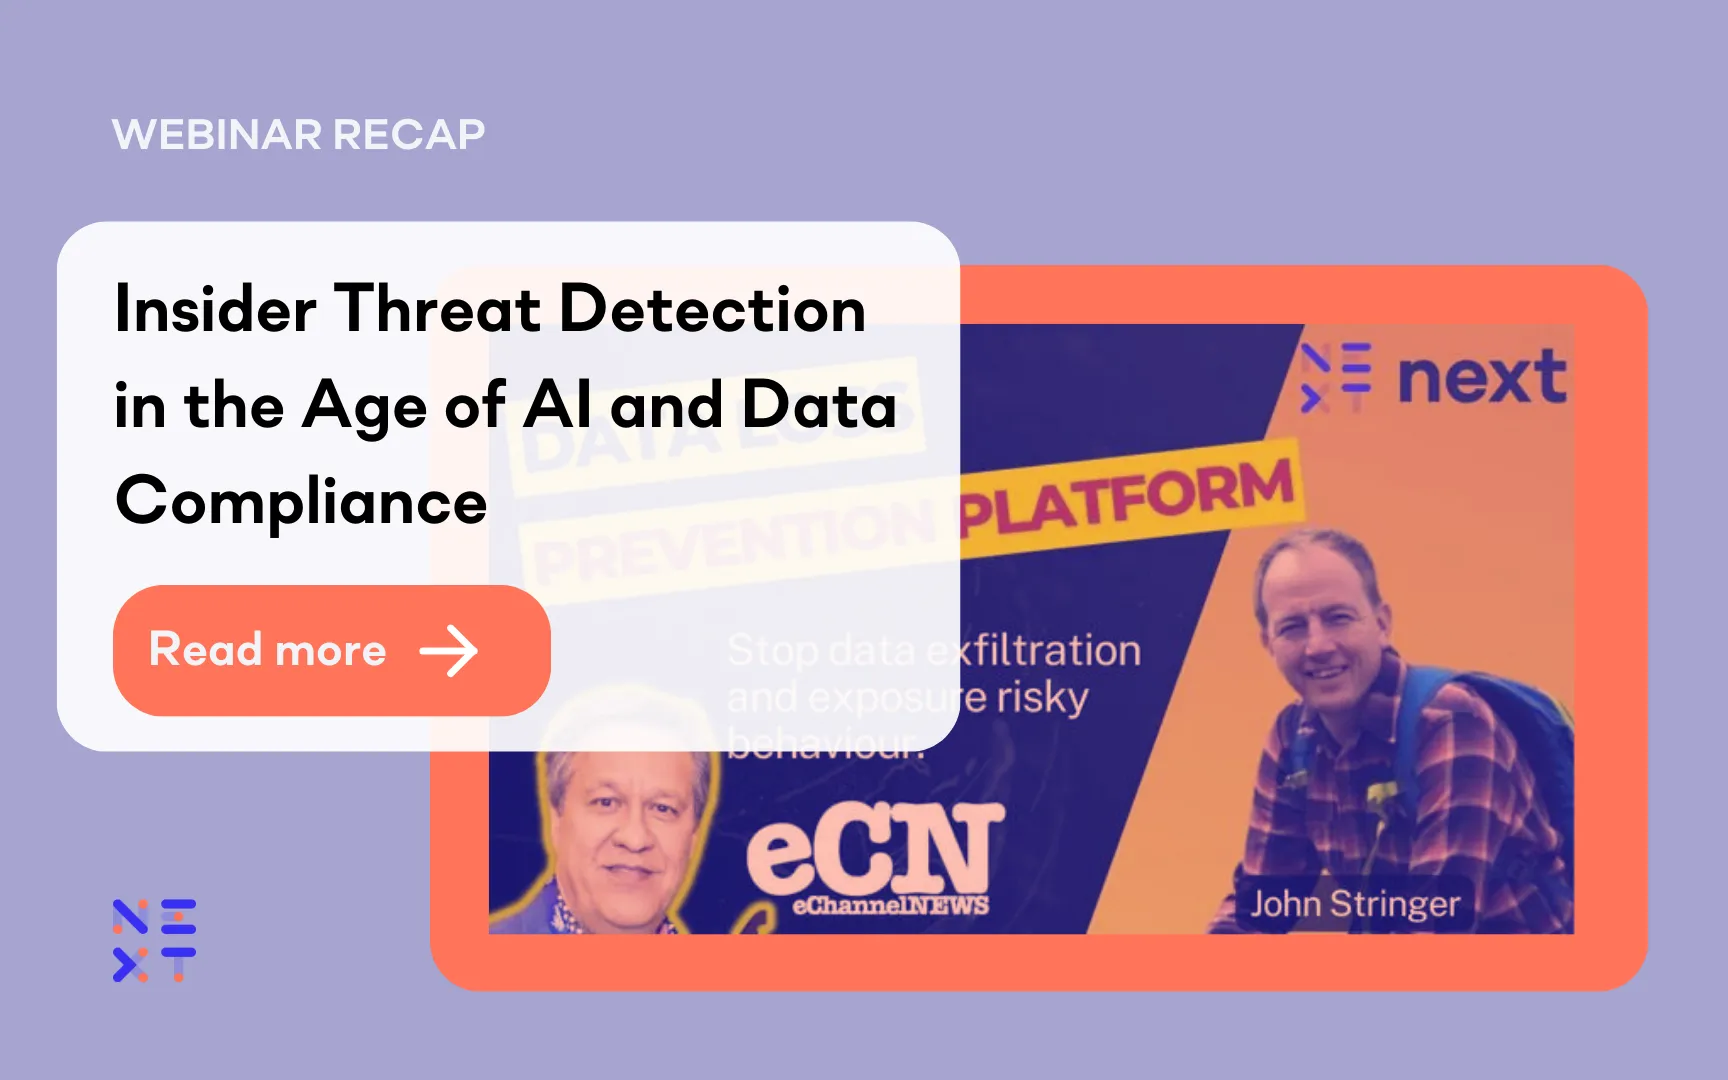 Webinar Recap: Insider Threat Detection in the Age of AI and Data Compliance